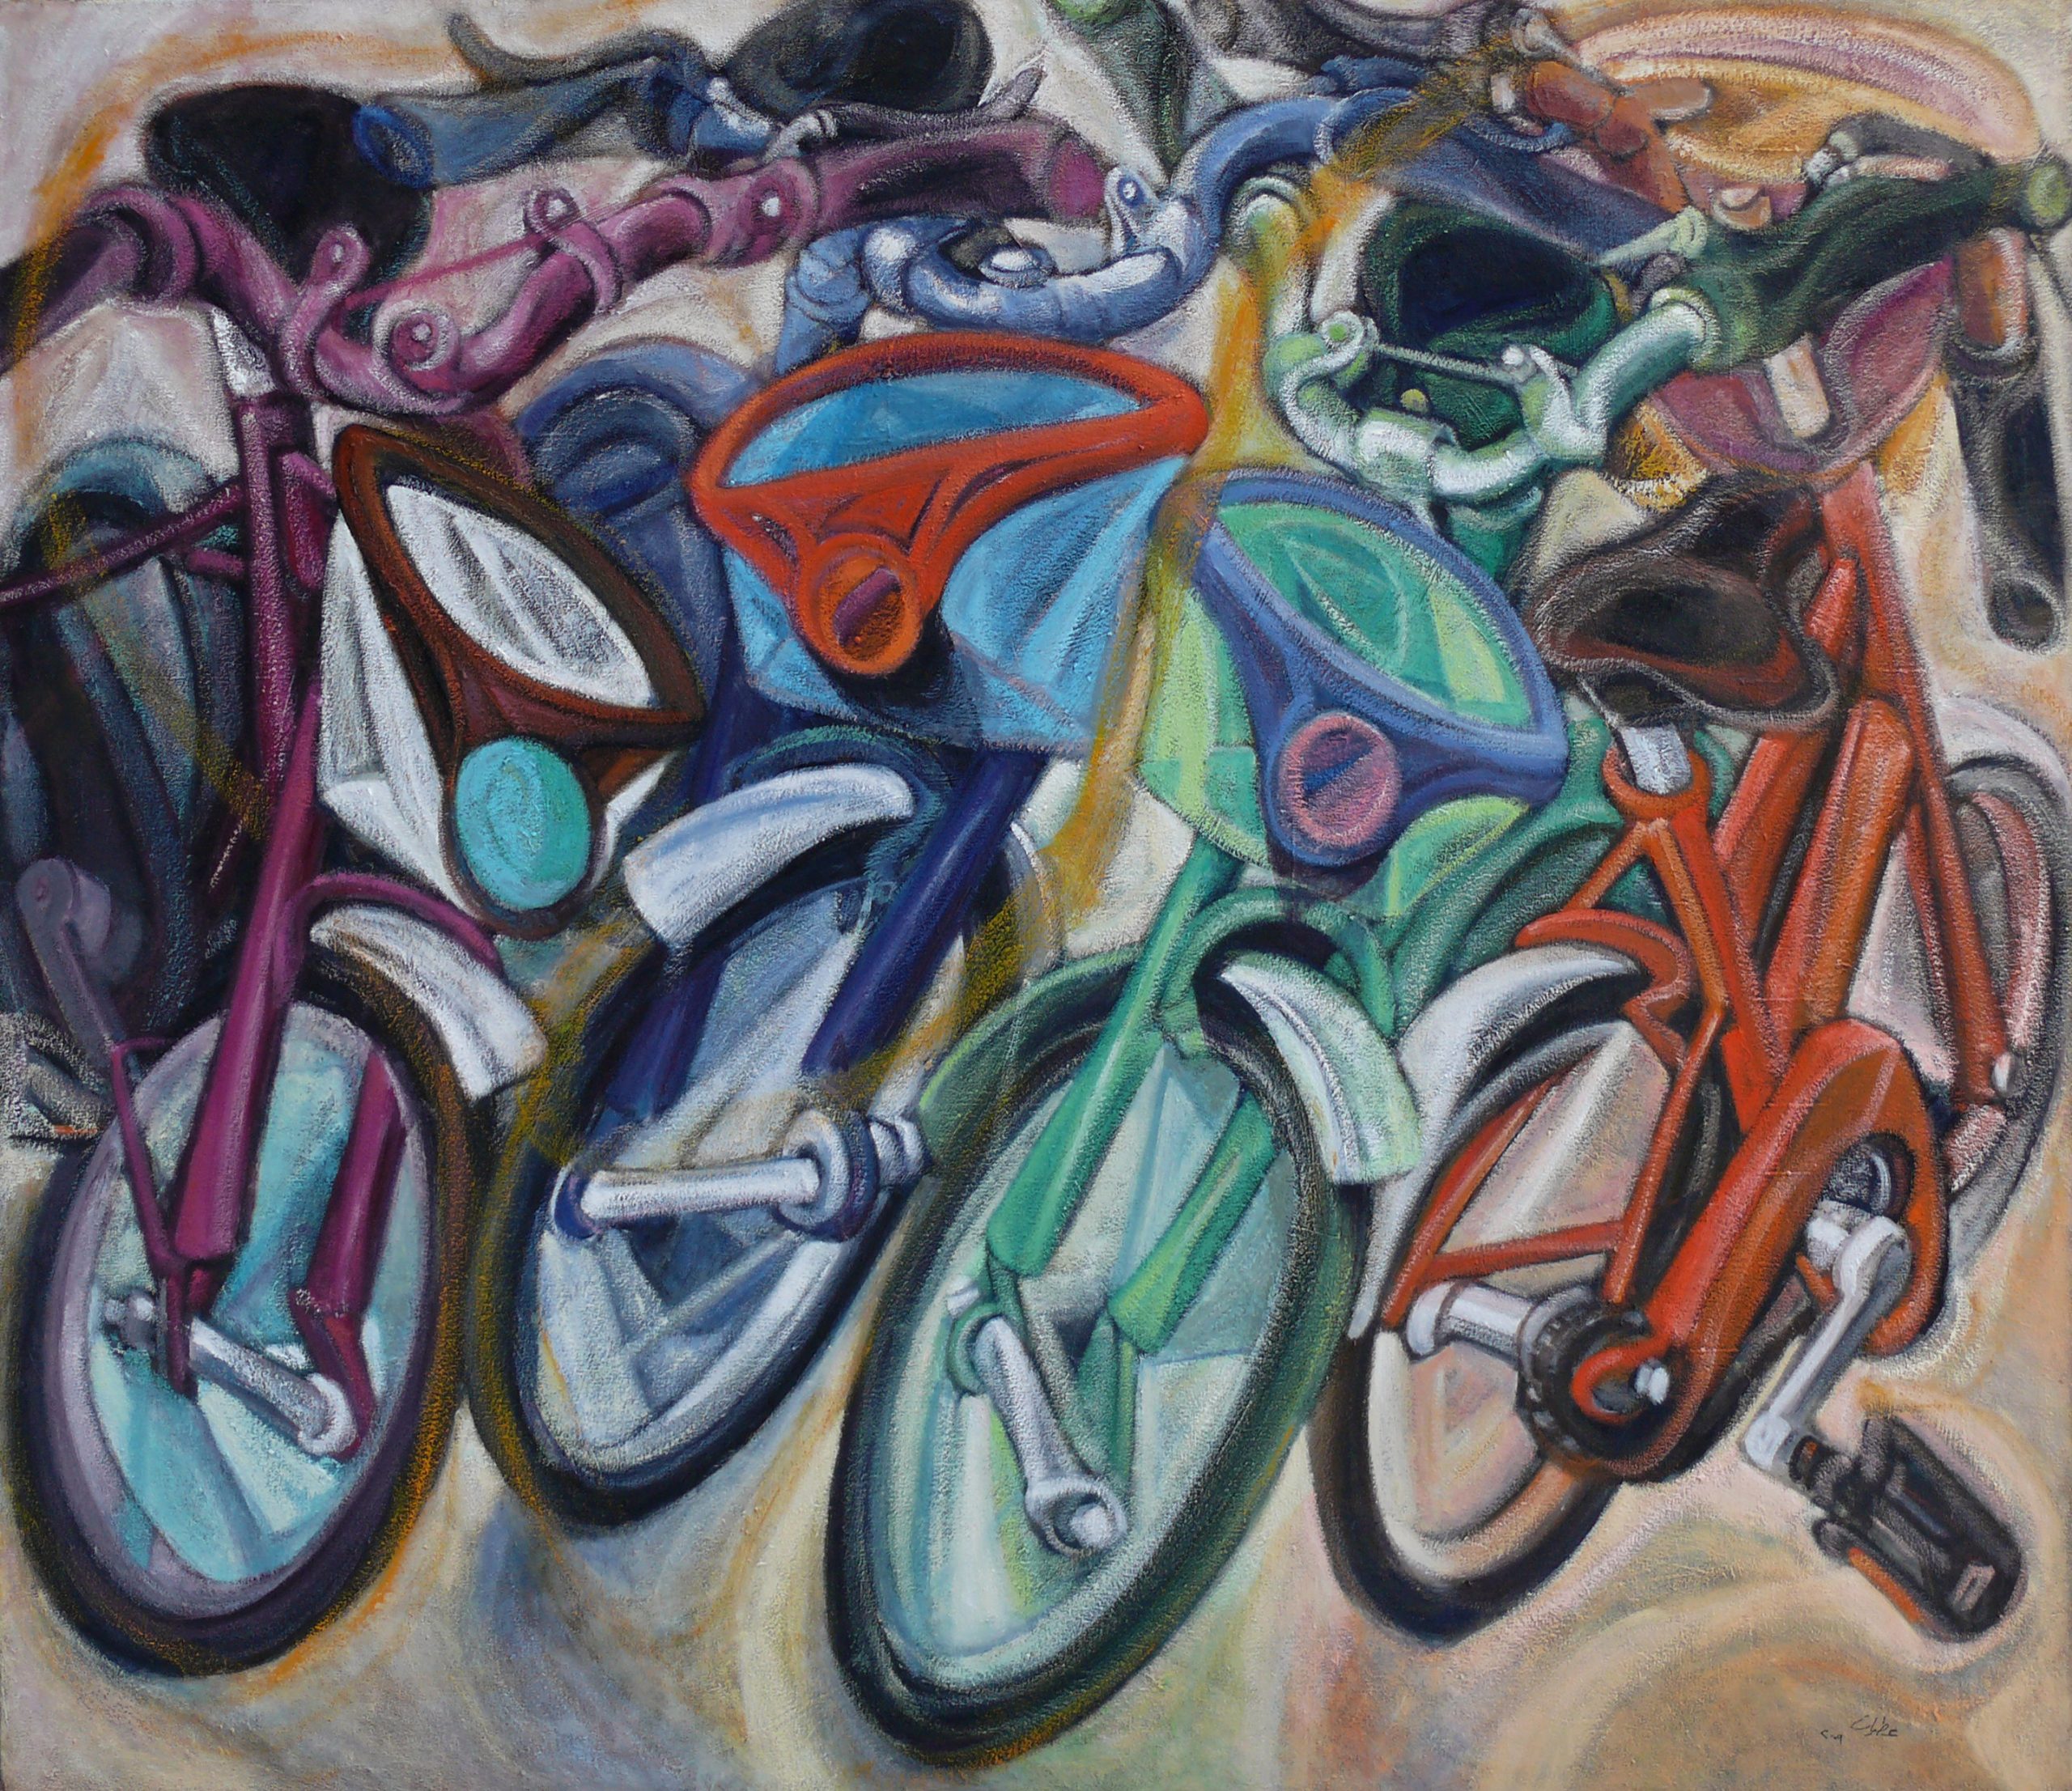 Composition of Bikes I